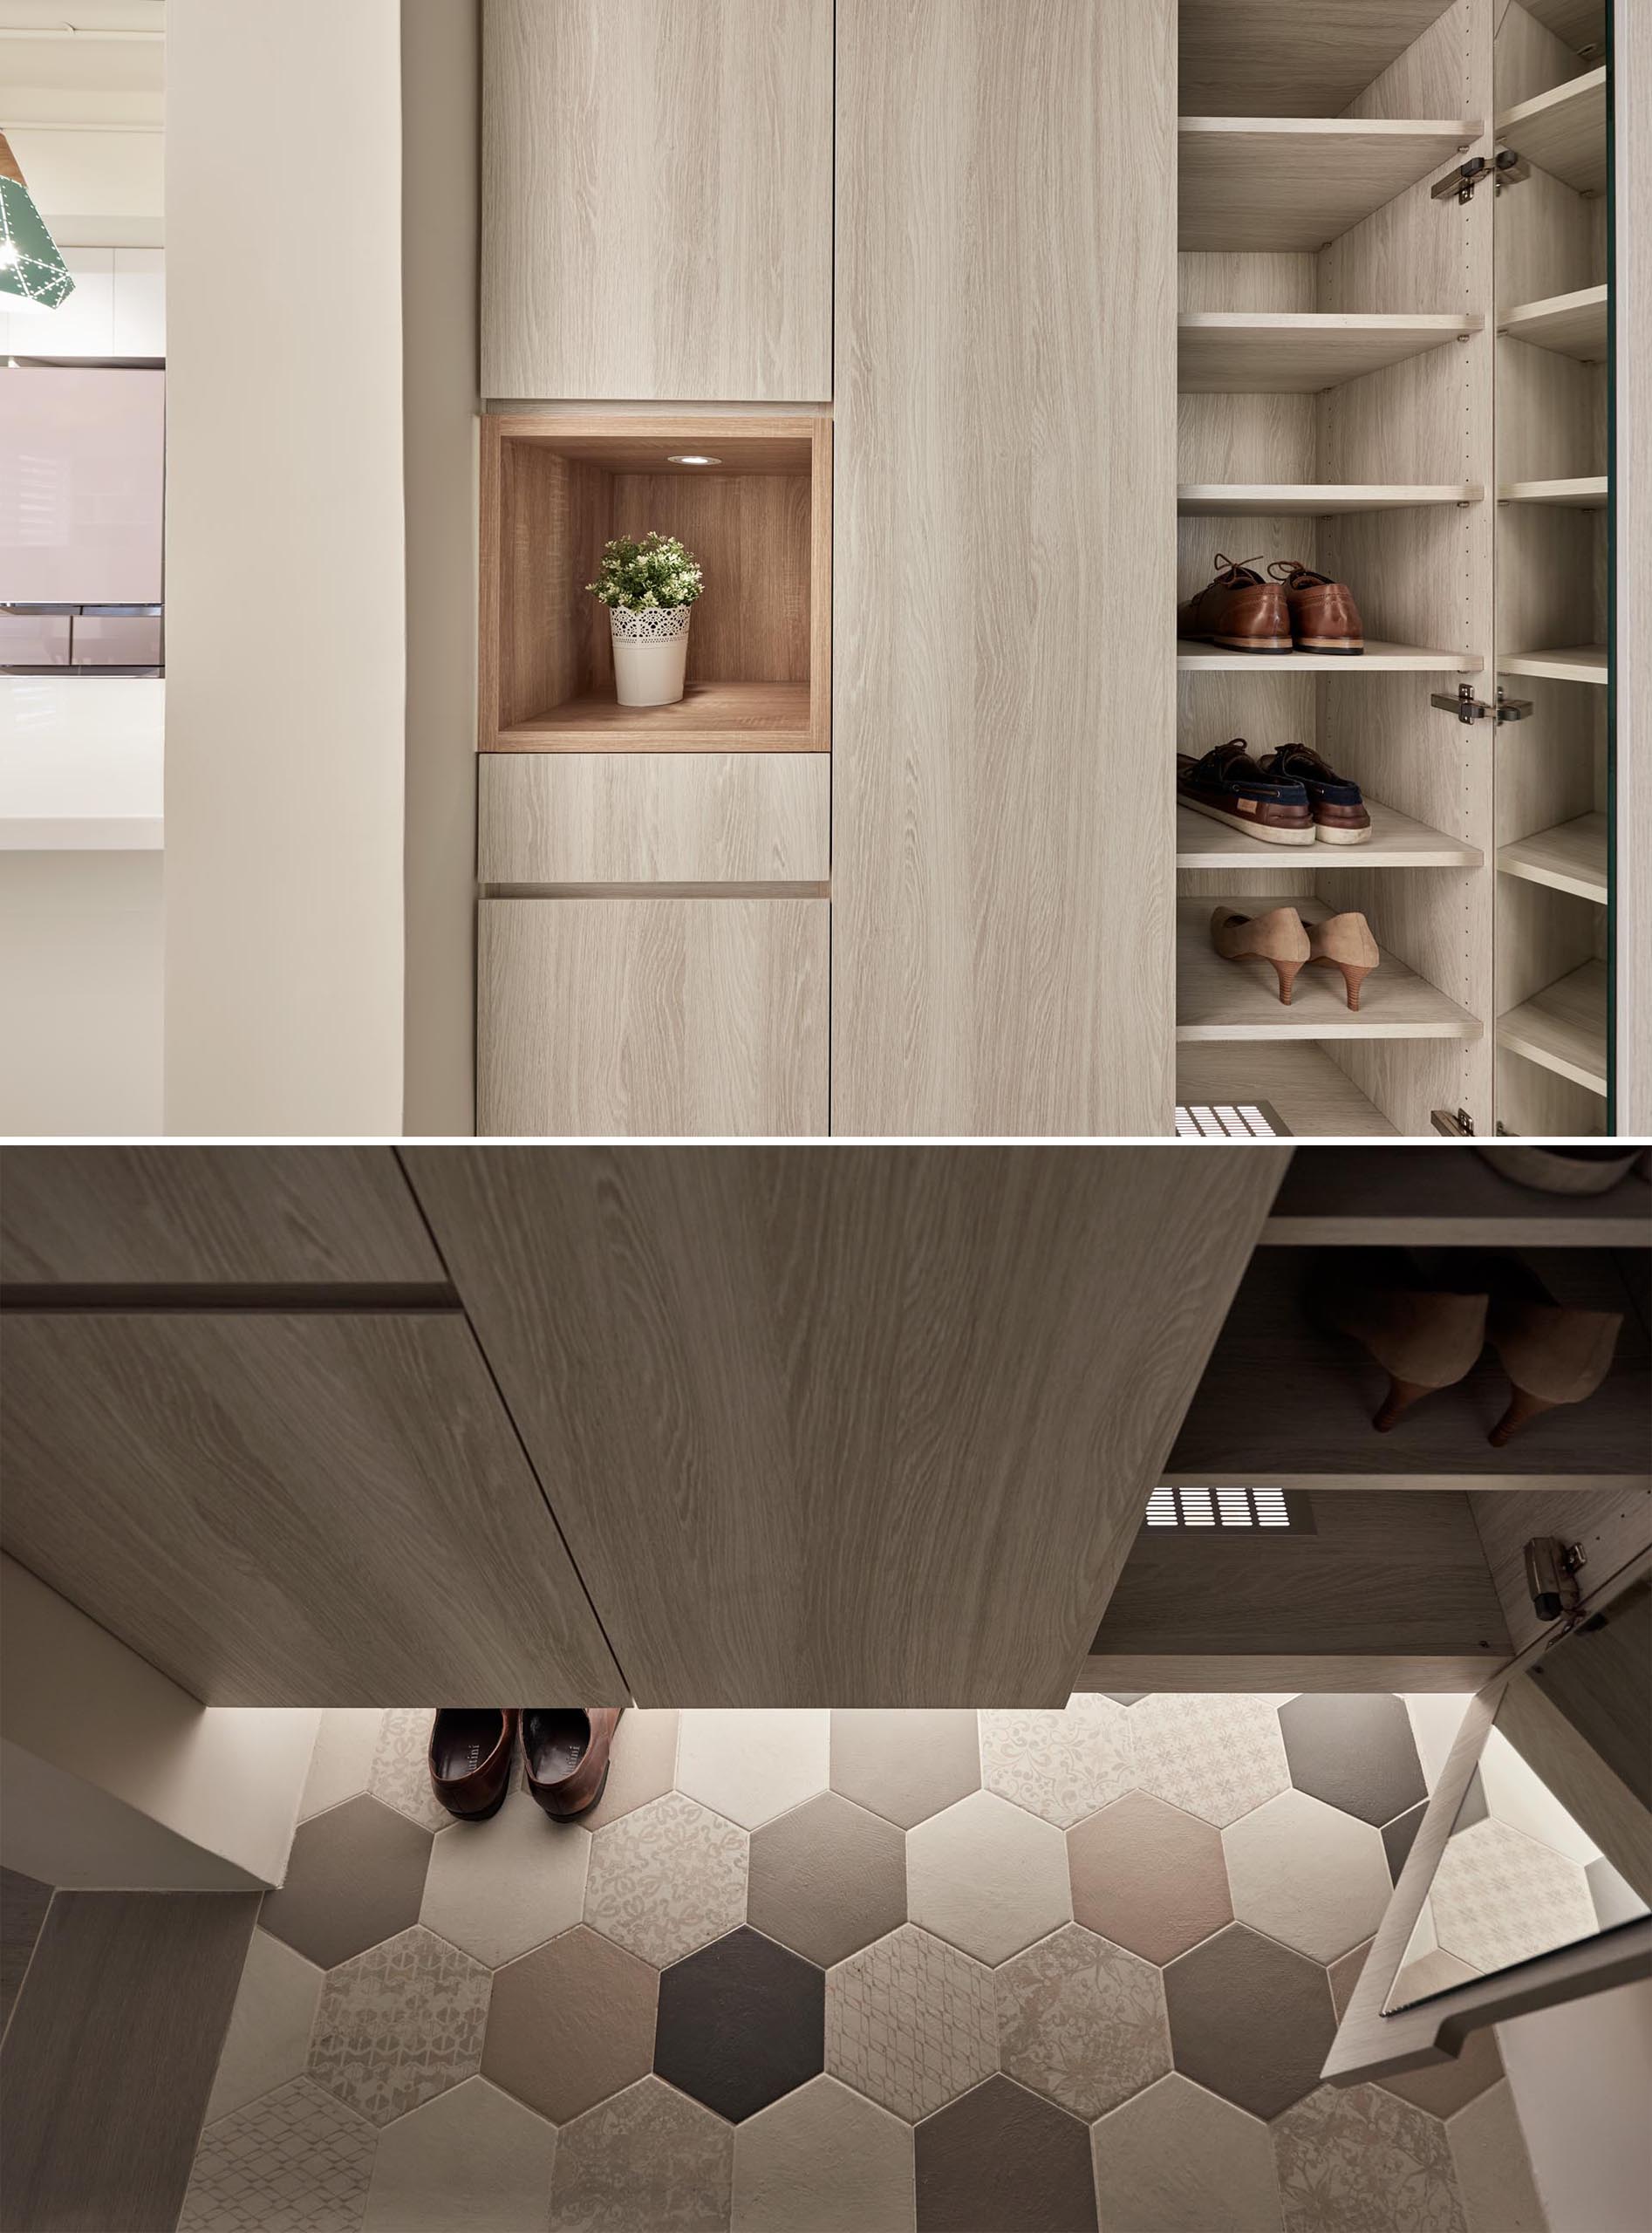 The entryway has tall storage closets that float above a tiled floor, that's highlighted with the use of hidden LED lights. A small open shelf with a light is an ideal place for keys and wallets.